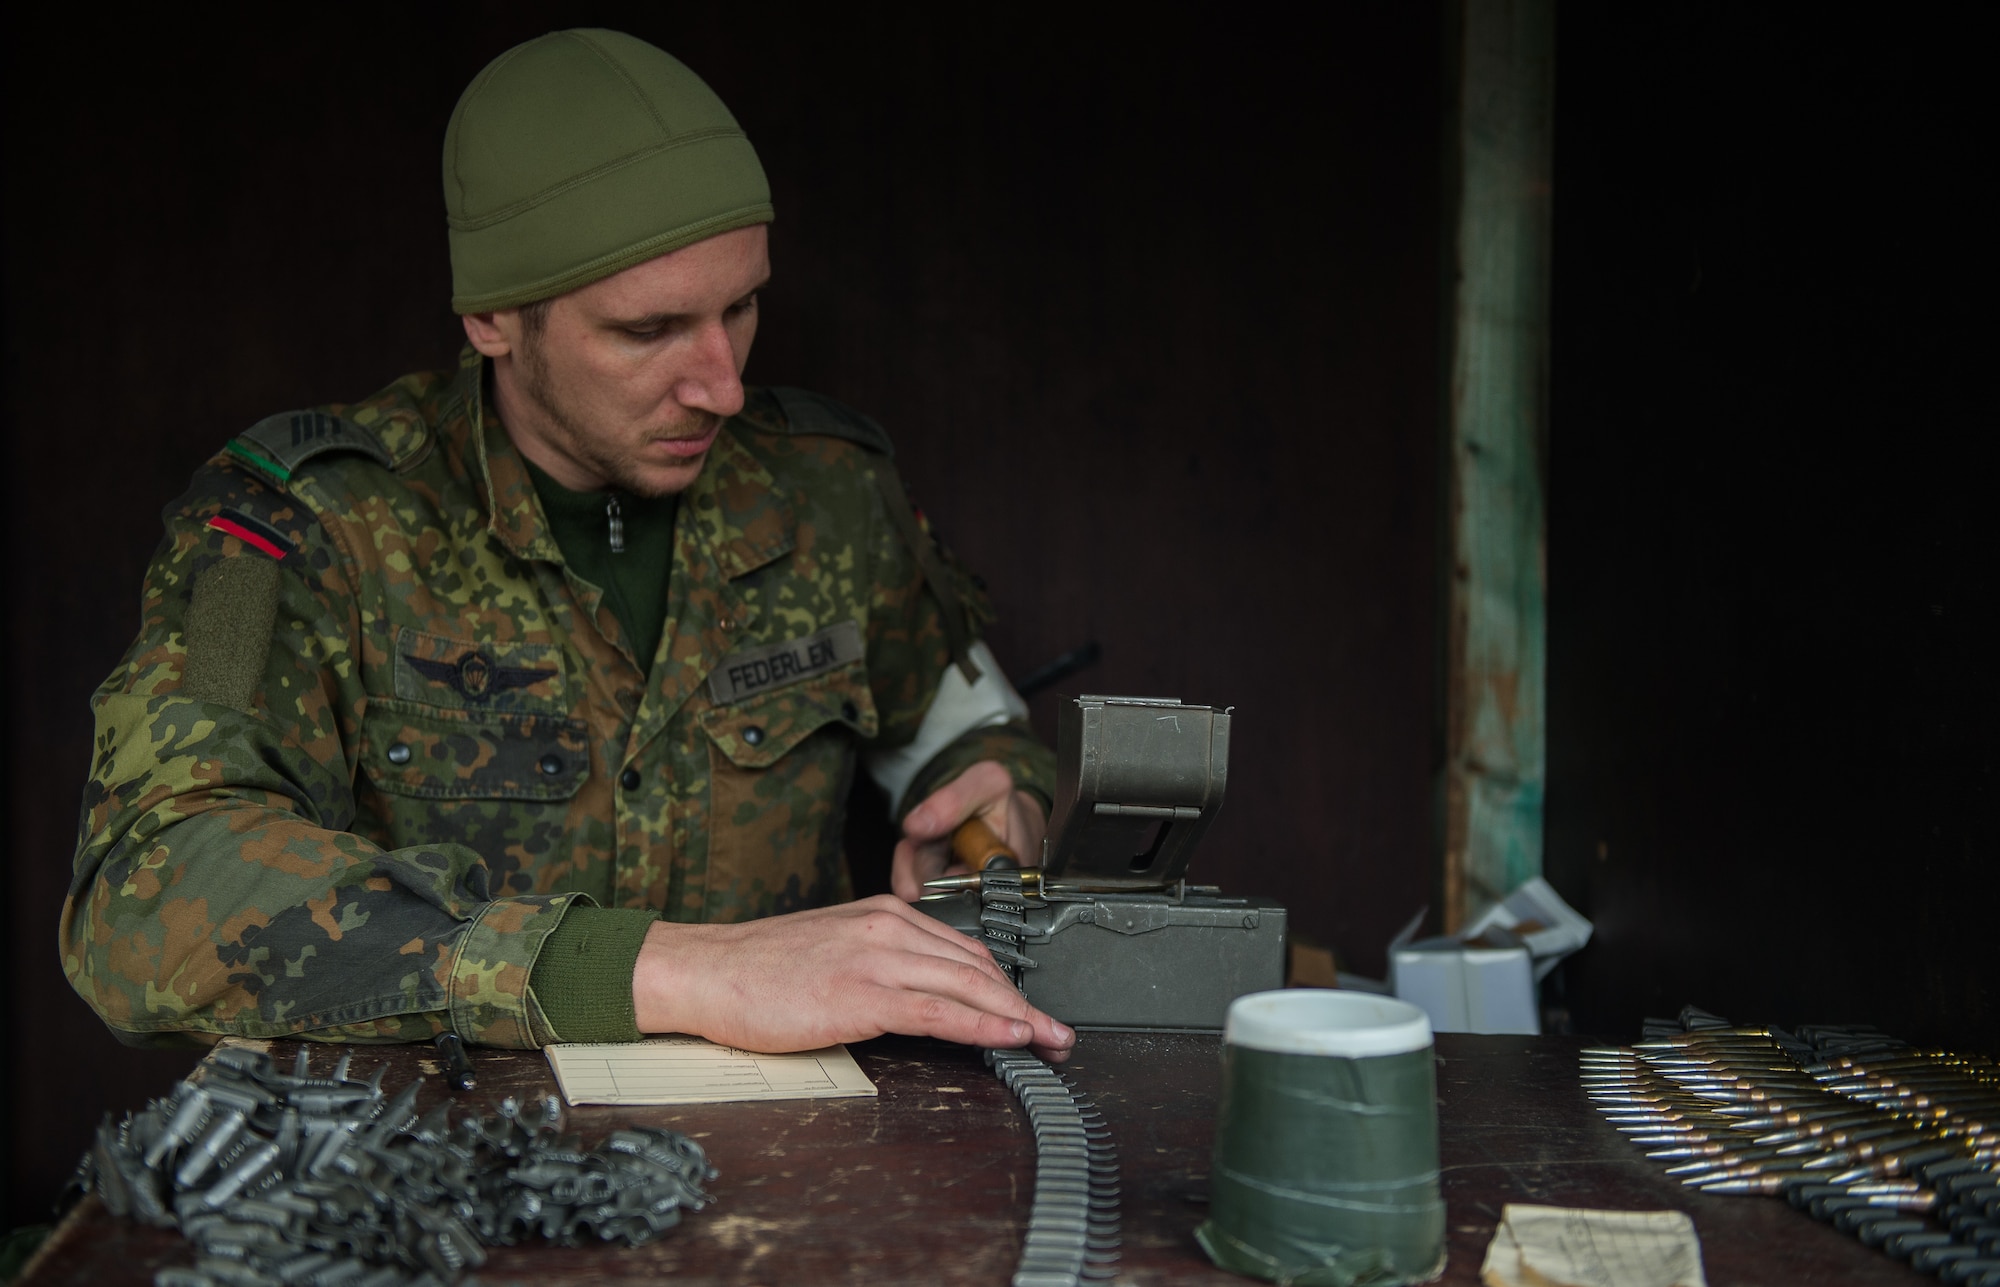 German Army Spc. Deniver Federlein, Airborne Infantry Regiment 26, 4th Company Airborne Troop, reloads ammunition for an MG3 machine gun Nov. 18, 2015, at Zweibruecken, Germany. German Soldiers hosted members of the 86th Security Forces Squadron as they attempted to earn the Bundeswehr (German army) marksmanship badge. (U.S. Air Force photo/Senior Airman Damon Kasberg)